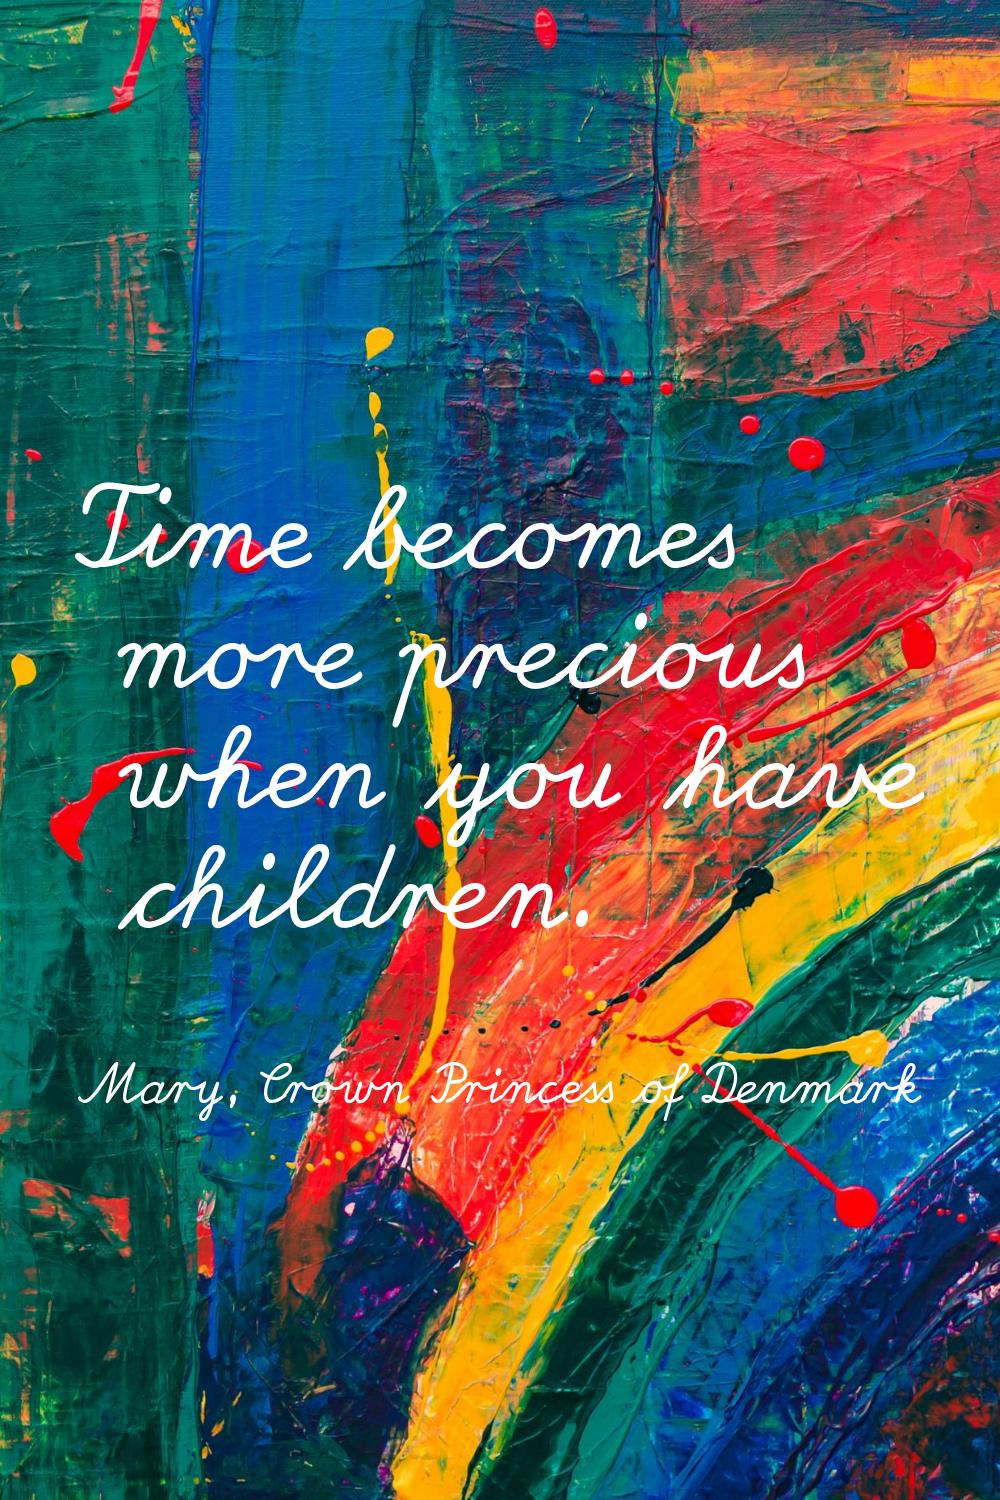 Time becomes more precious when you have children.